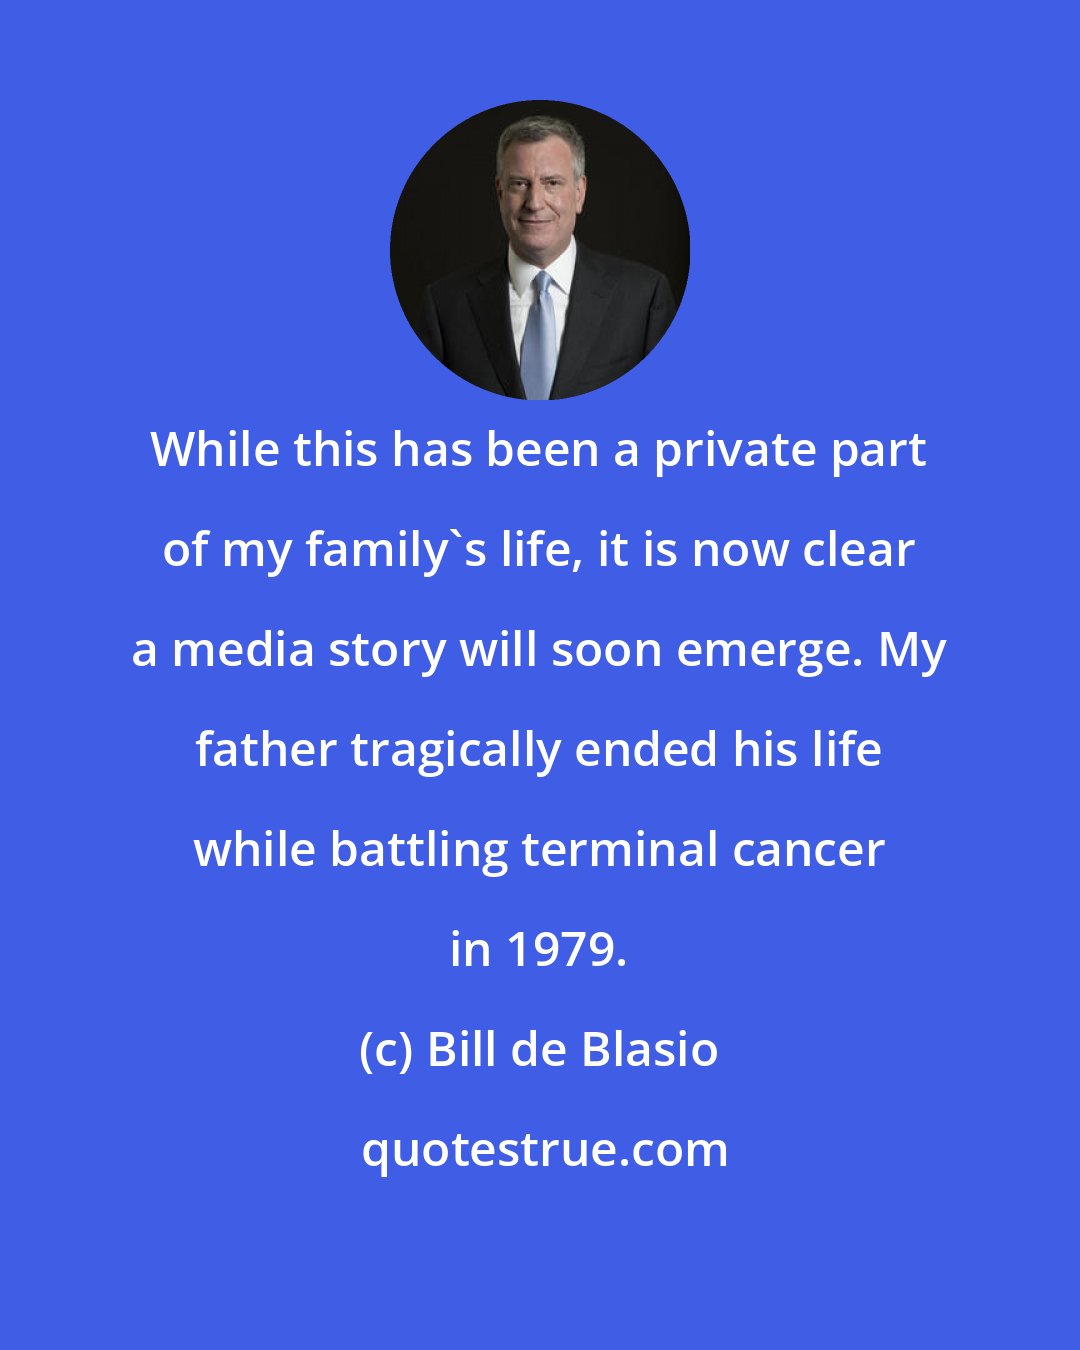 Bill de Blasio: While this has been a private part of my family's life, it is now clear a media story will soon emerge. My father tragically ended his life while battling terminal cancer in 1979.